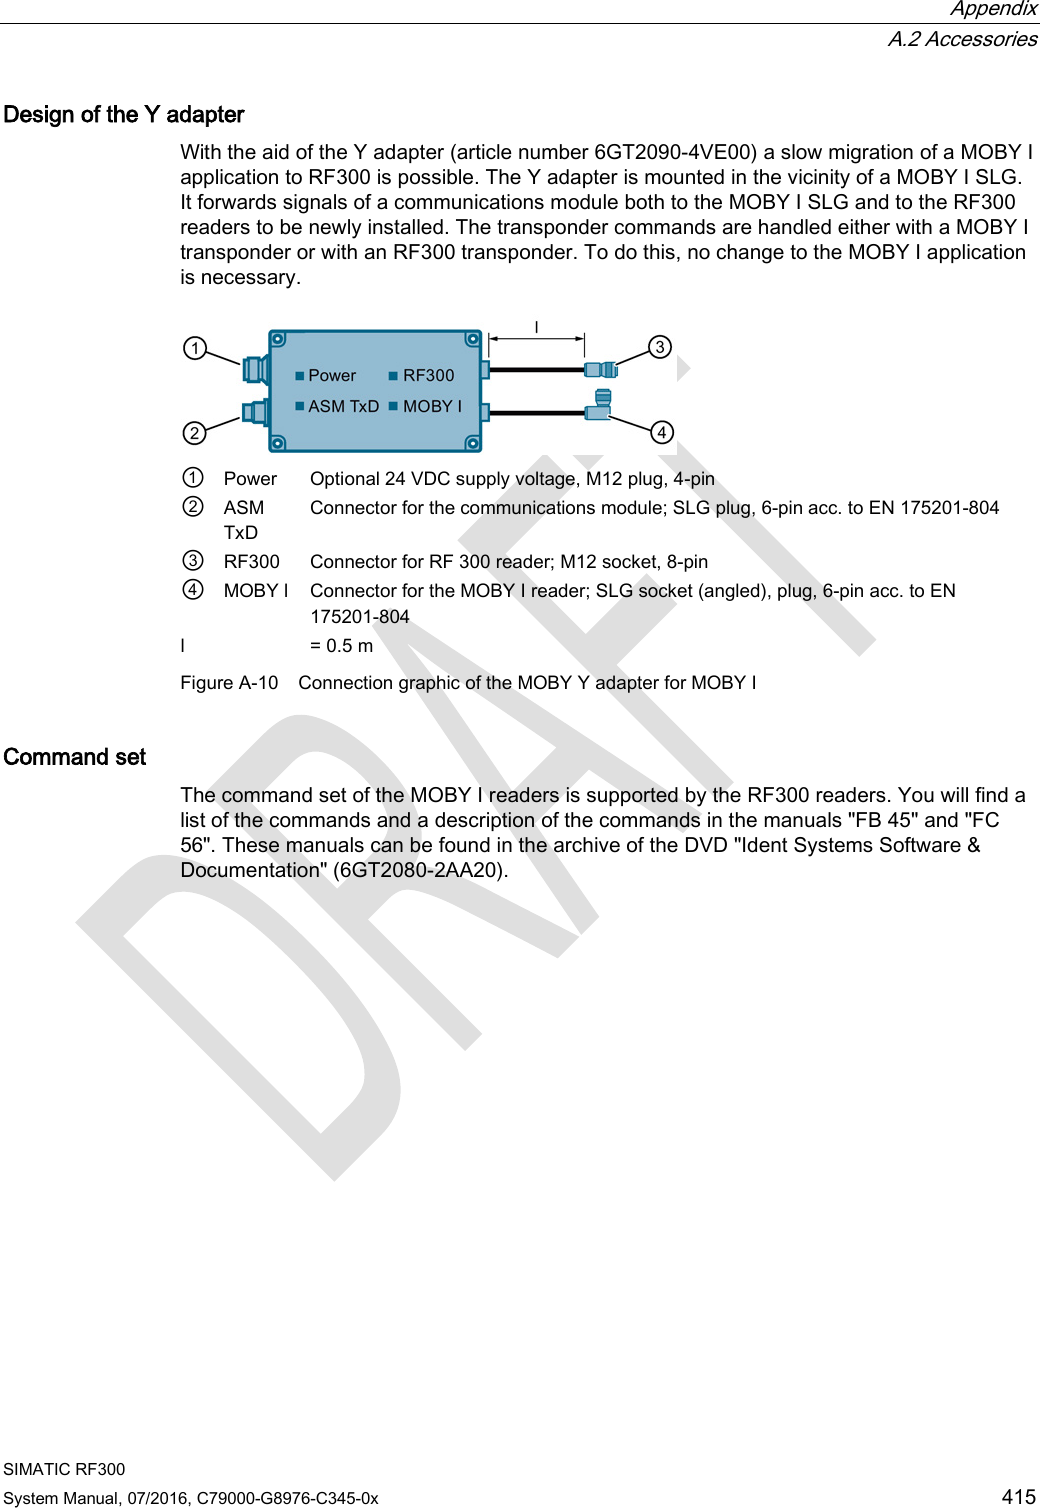  Appendix  A.2 Accessories SIMATIC RF300 System Manual, 07/2016, C79000-G8976-C345-0x 415 Design of the Y adapter With the aid of the Y adapter (article number 6GT2090-4VE00) a slow migration of a MOBY I application to RF300 is possible. The Y adapter is mounted in the vicinity of a MOBY I SLG. It forwards signals of a communications module both to the MOBY I SLG and to the RF300 readers to be newly installed. The transponder commands are handled either with a MOBY I transponder or with an RF300 transponder. To do this, no change to the MOBY I application is necessary.  ① Power Optional 24 VDC supply voltage, M12 plug, 4-pin ②  ASM TxD Connector for the communications module; SLG plug, 6-pin acc. to EN 175201-804 ③ RF300 Connector for RF 300 reader; M12 socket, 8-pin ④ MOBY l Connector for the MOBY I reader; SLG socket (angled), plug, 6-pin acc. to EN 175201-804 l  = 0.5 m Figure A-10 Connection graphic of the MOBY Y adapter for MOBY I Command set The command set of the MOBY I readers is supported by the RF300 readers. You will find a list of the commands and a description of the commands in the manuals &quot;FB 45&quot; and &quot;FC 56&quot;. These manuals can be found in the archive of the DVD &quot;Ident Systems Software &amp; Documentation&quot; (6GT2080-2AA20). 